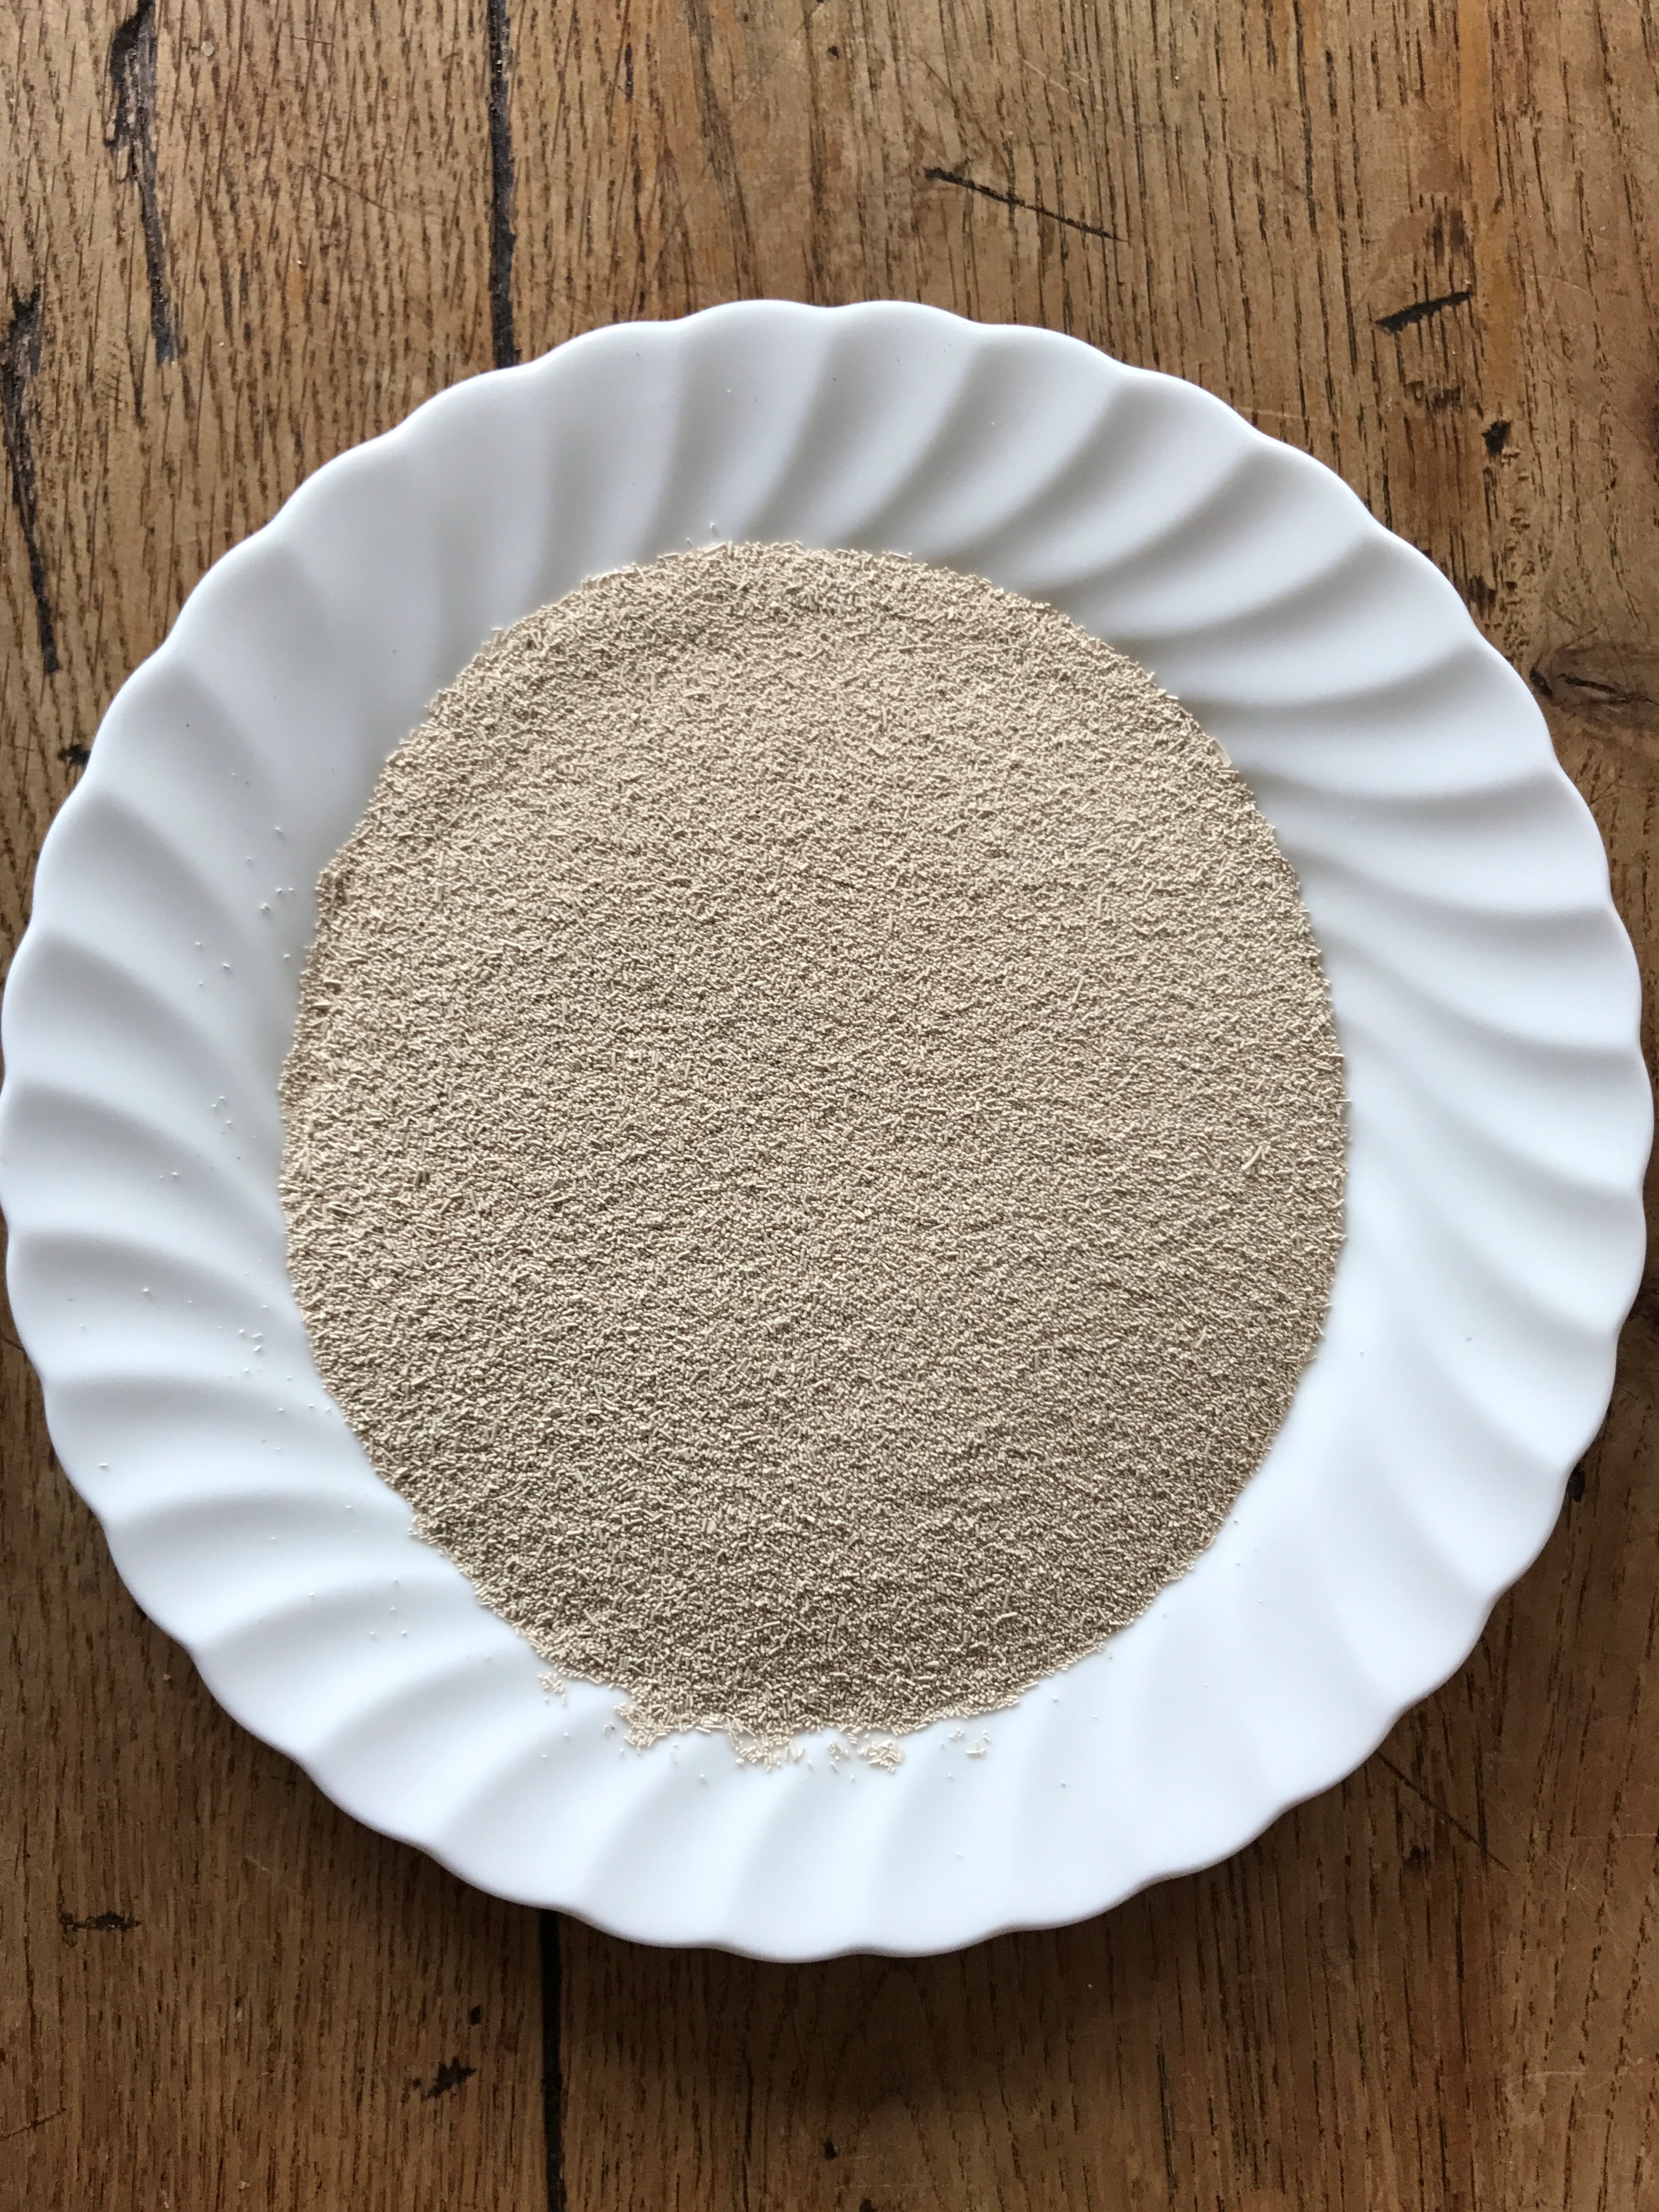 Baker’s yeast - Saccharomyces cerevisiae